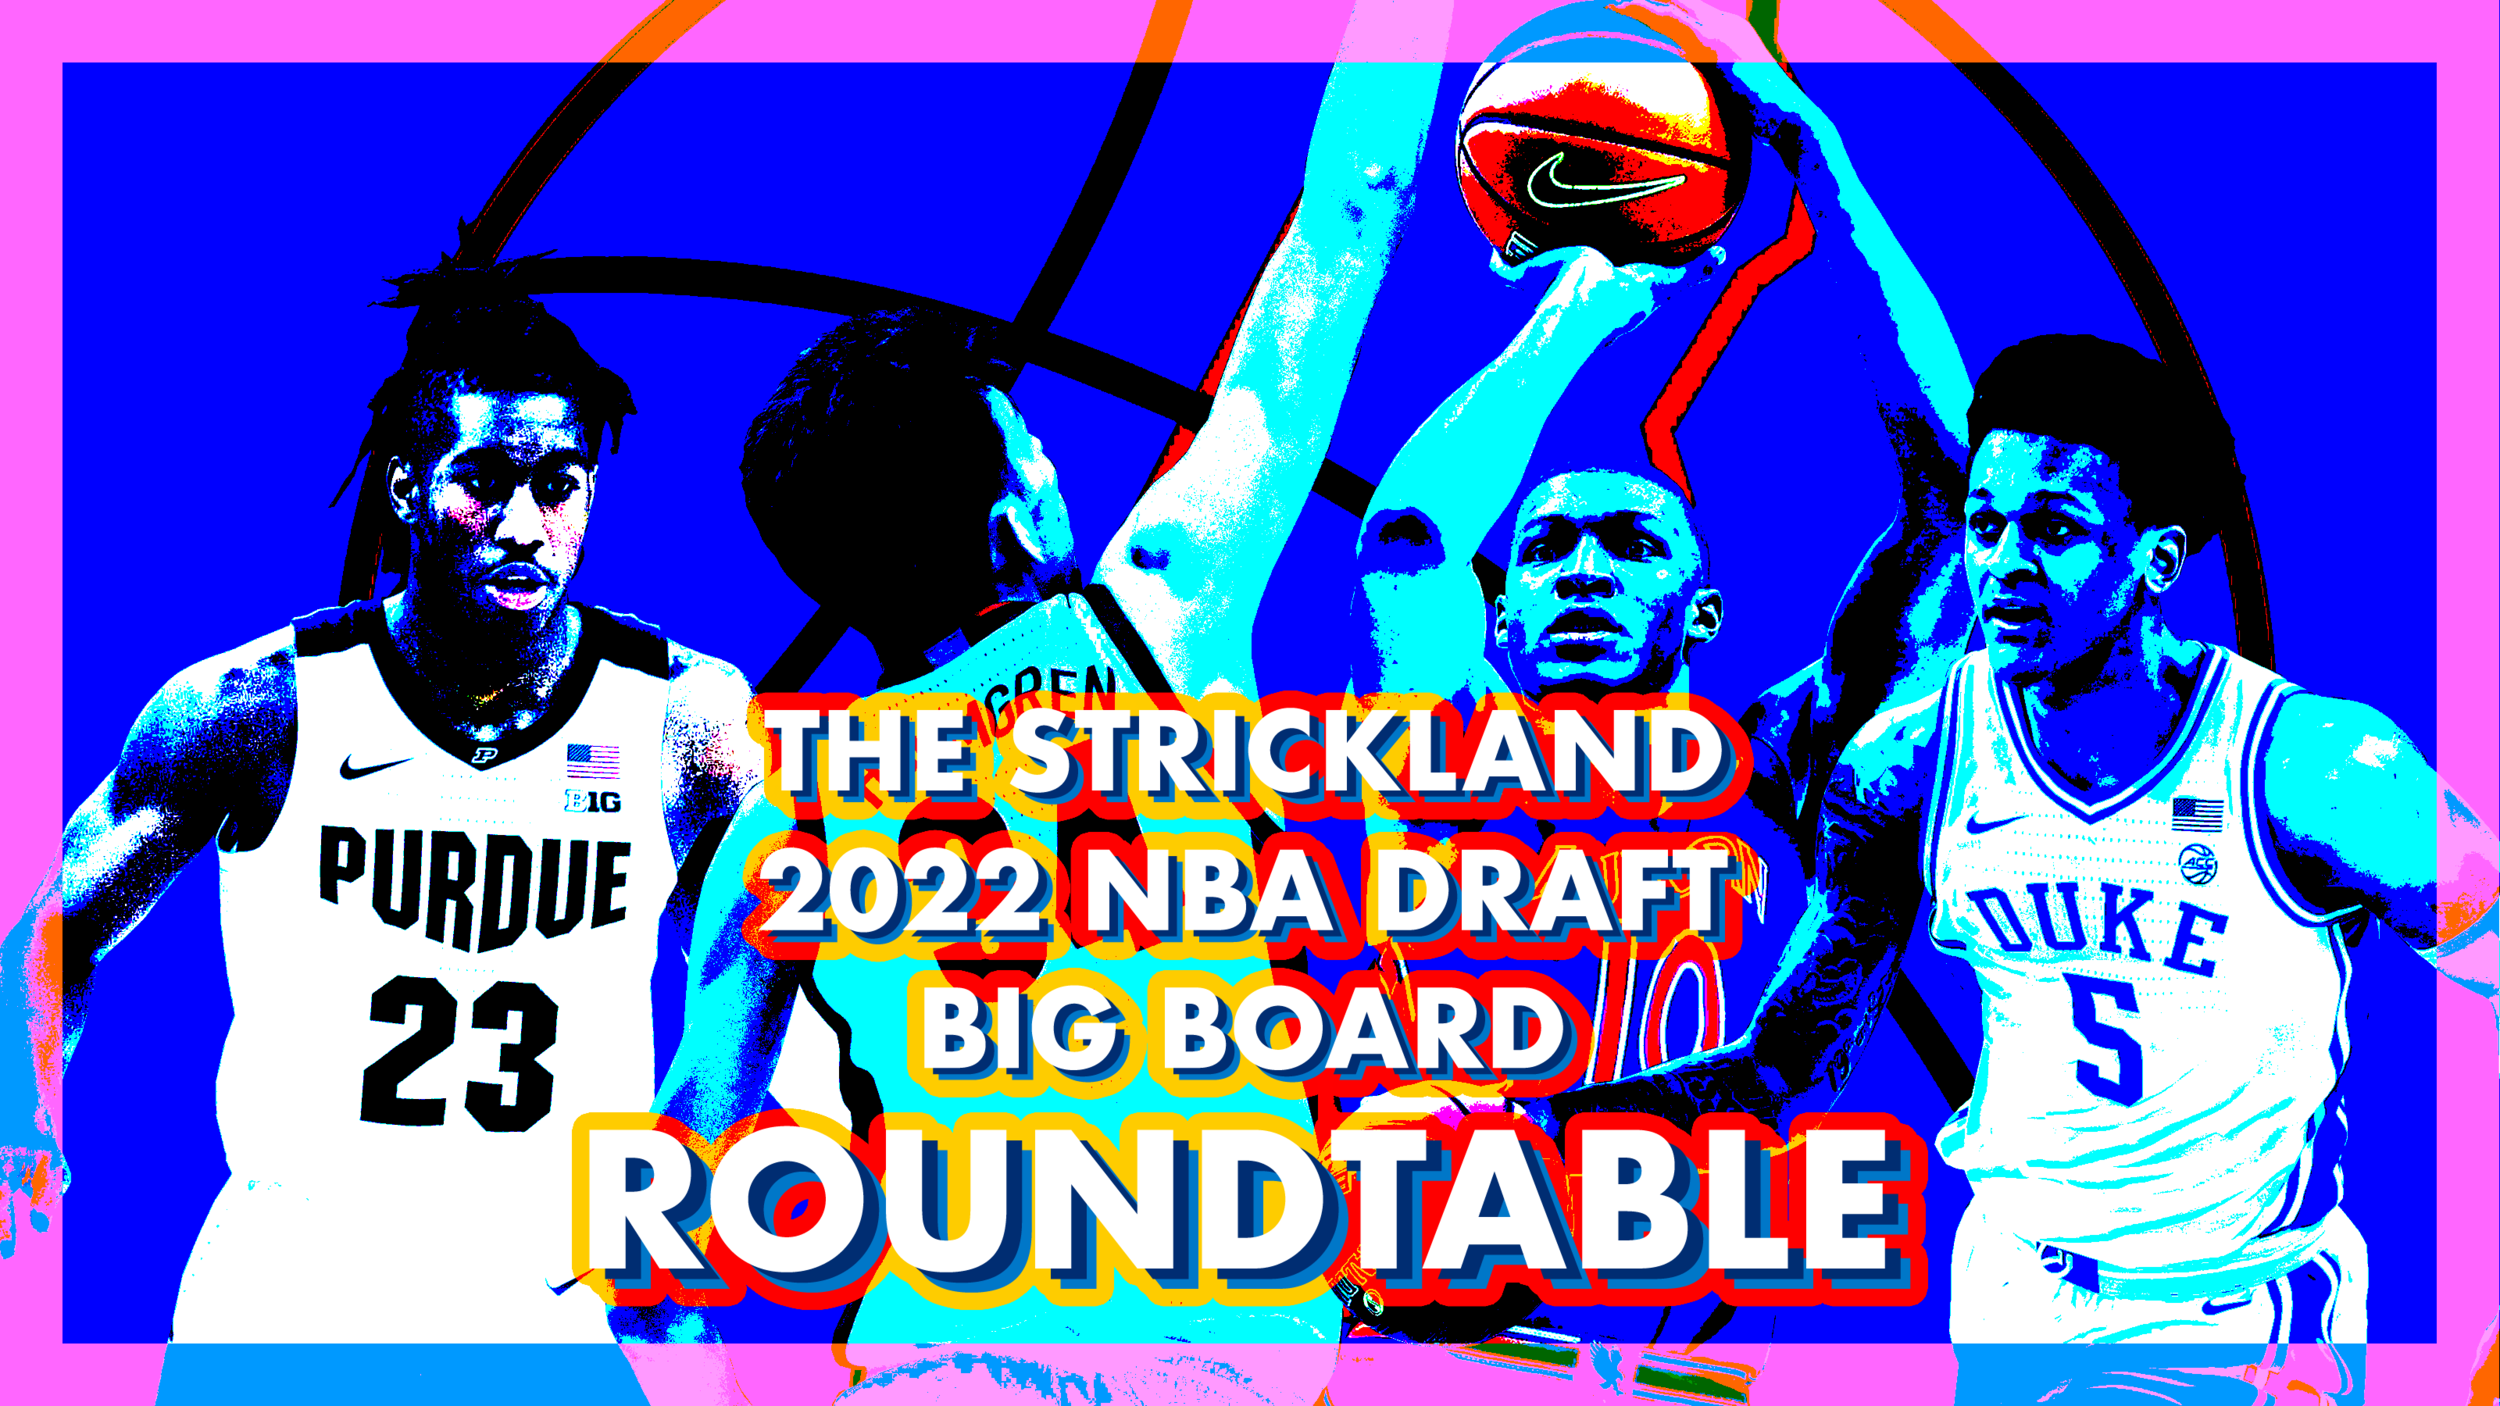 2022 Strickland Knicks-specific NBA Draft Big Board 1.0 roundtable